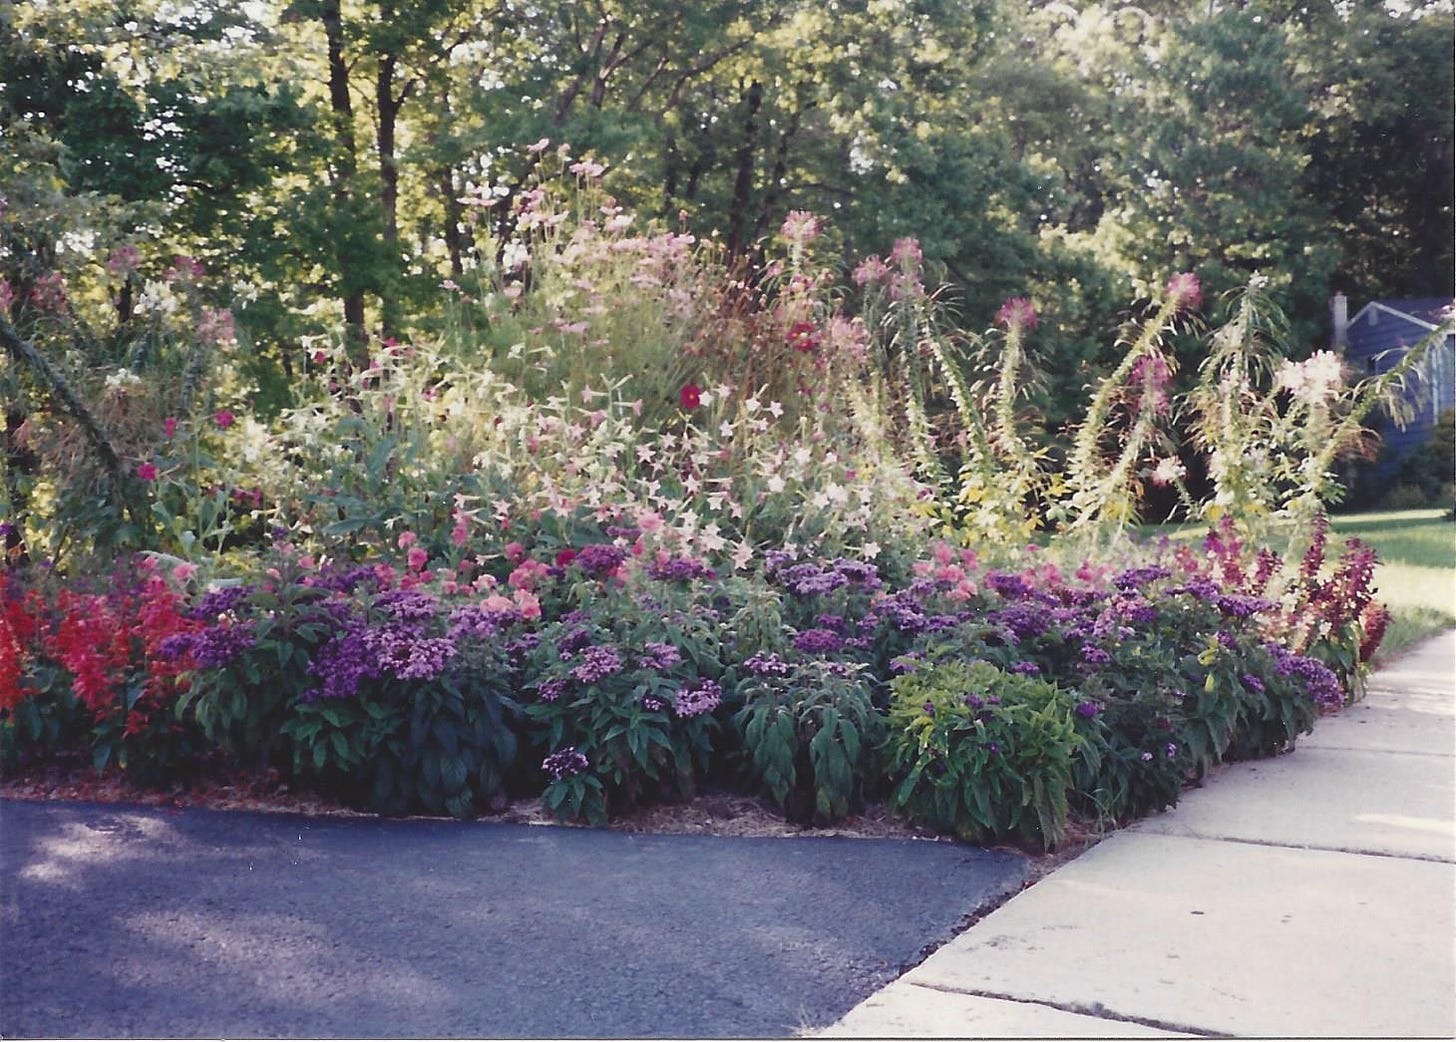 A grogeous collection of annual flowers--salvia, heliotrope, nicotiana, and cleome, in shades of pink, purple, red, and white--brighten the hard edge of a driveway and sidewalk--